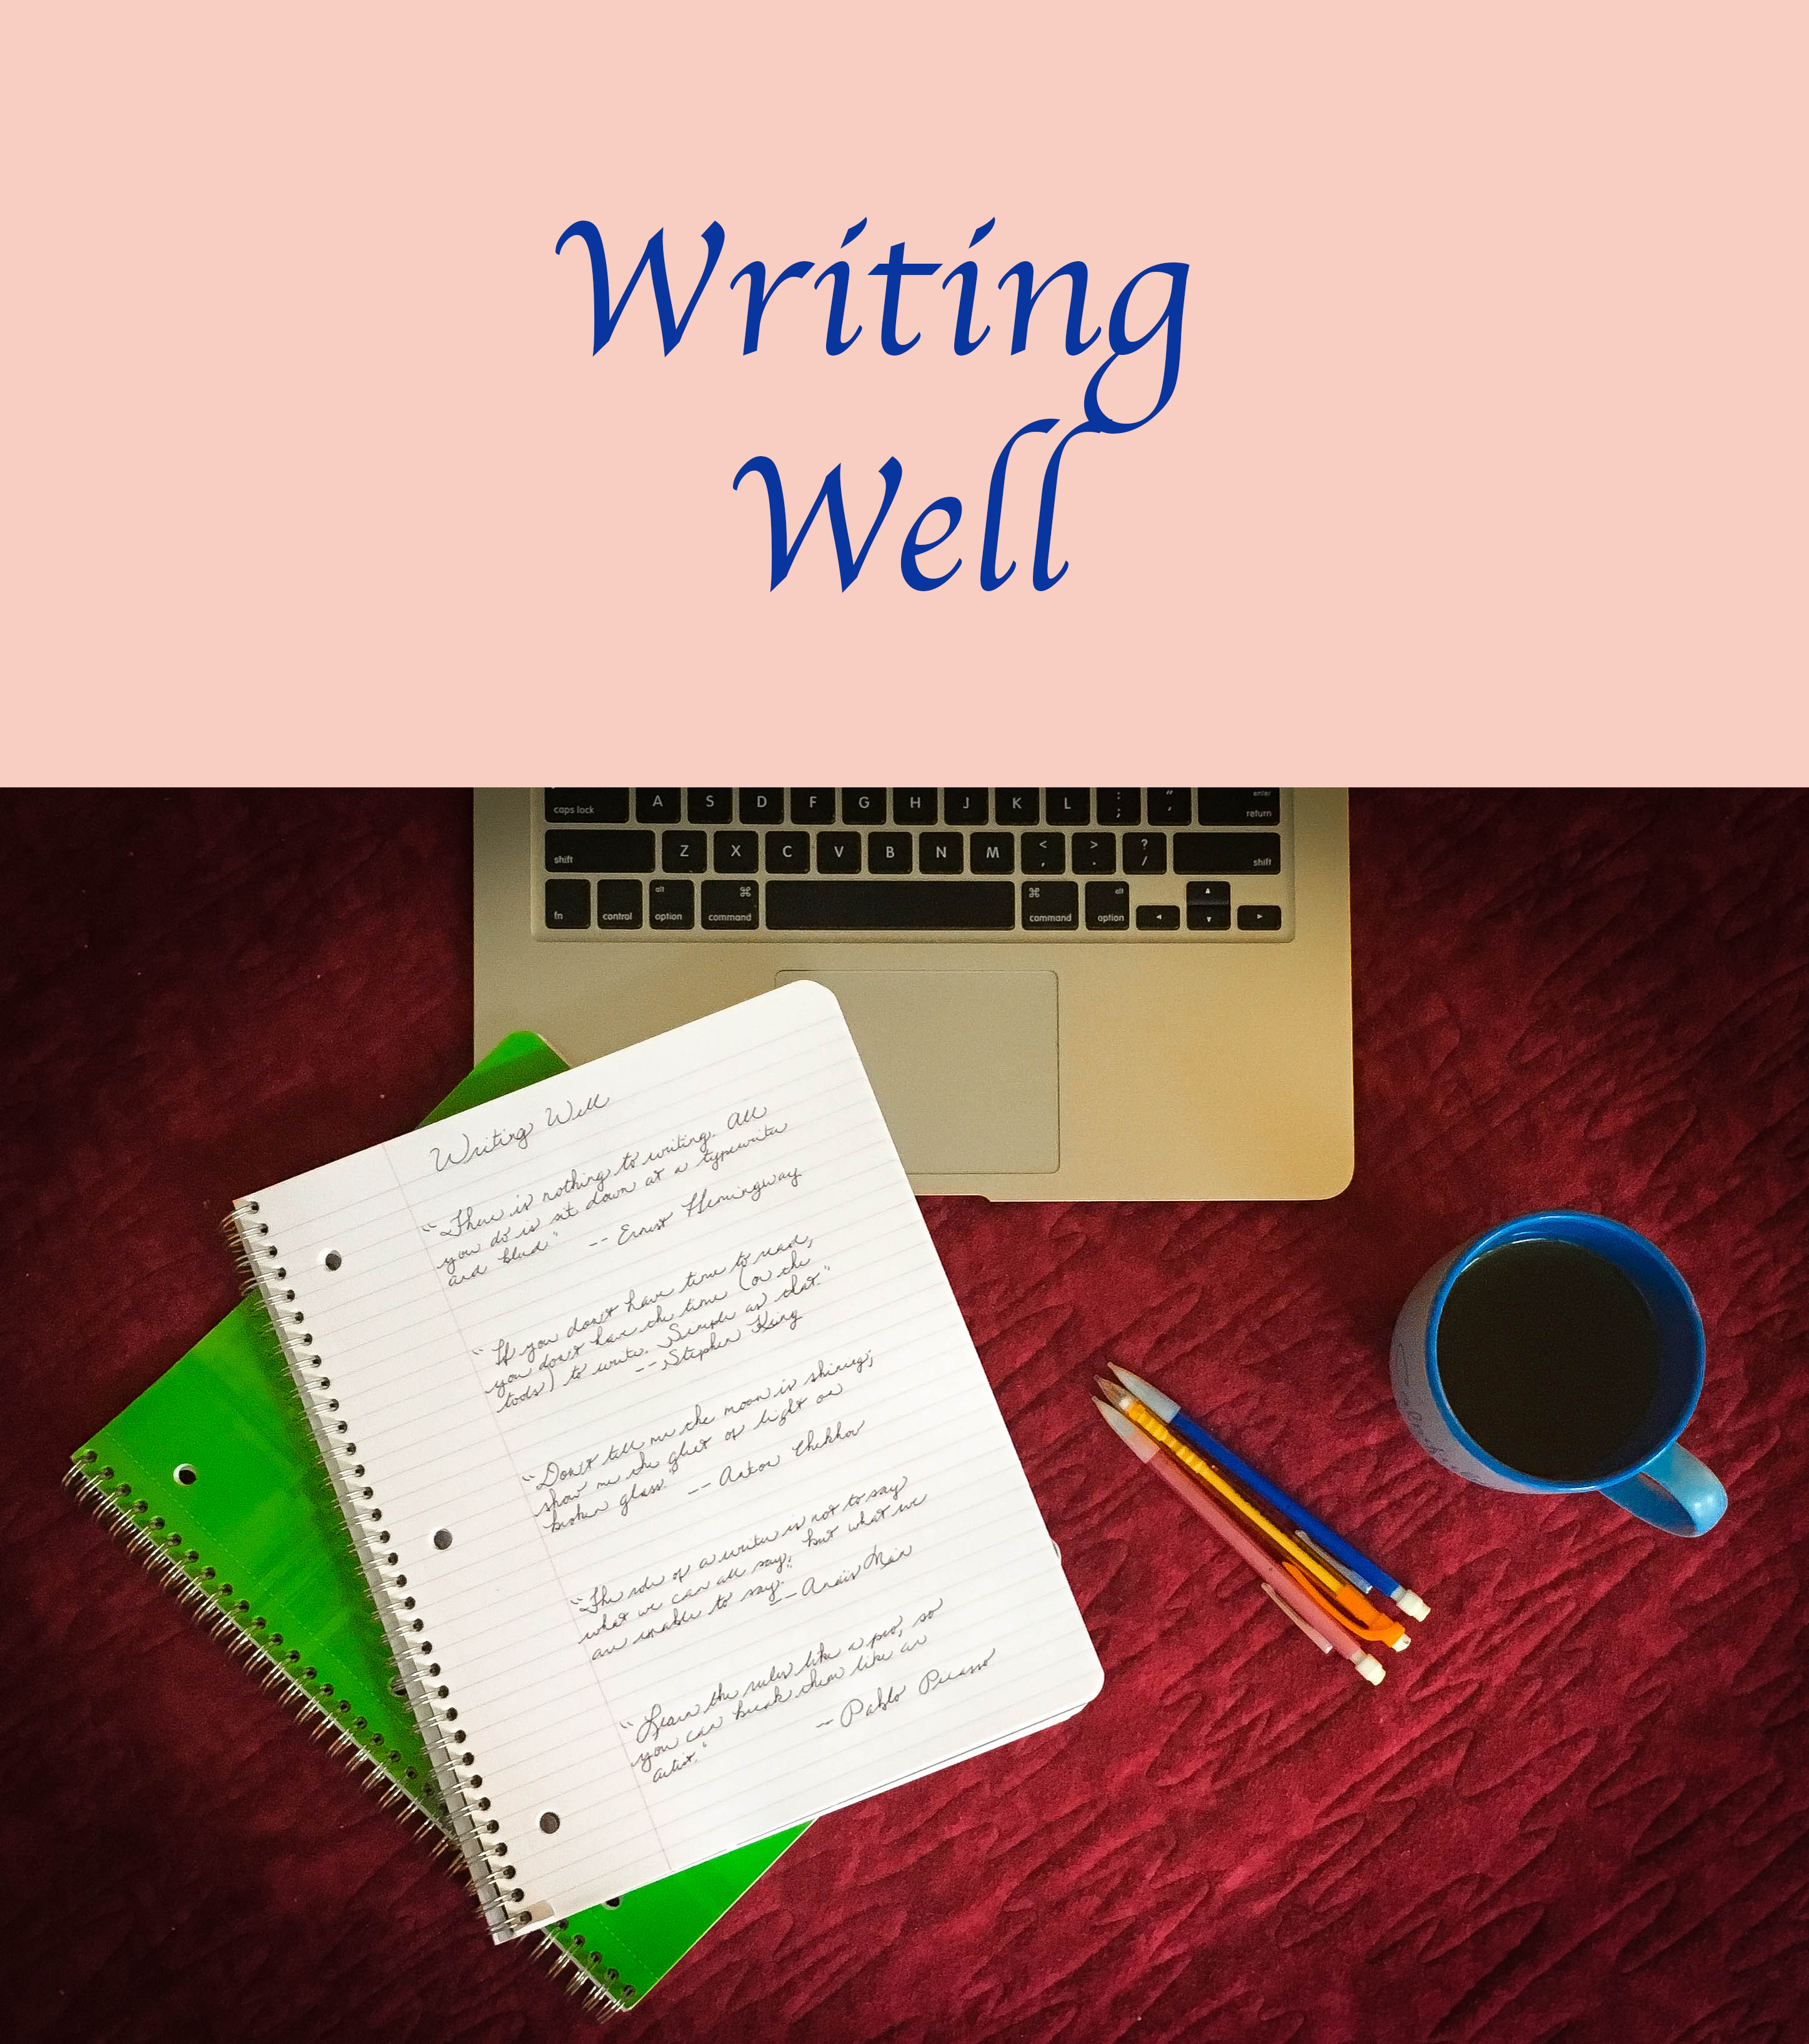 New Series on Writing Well